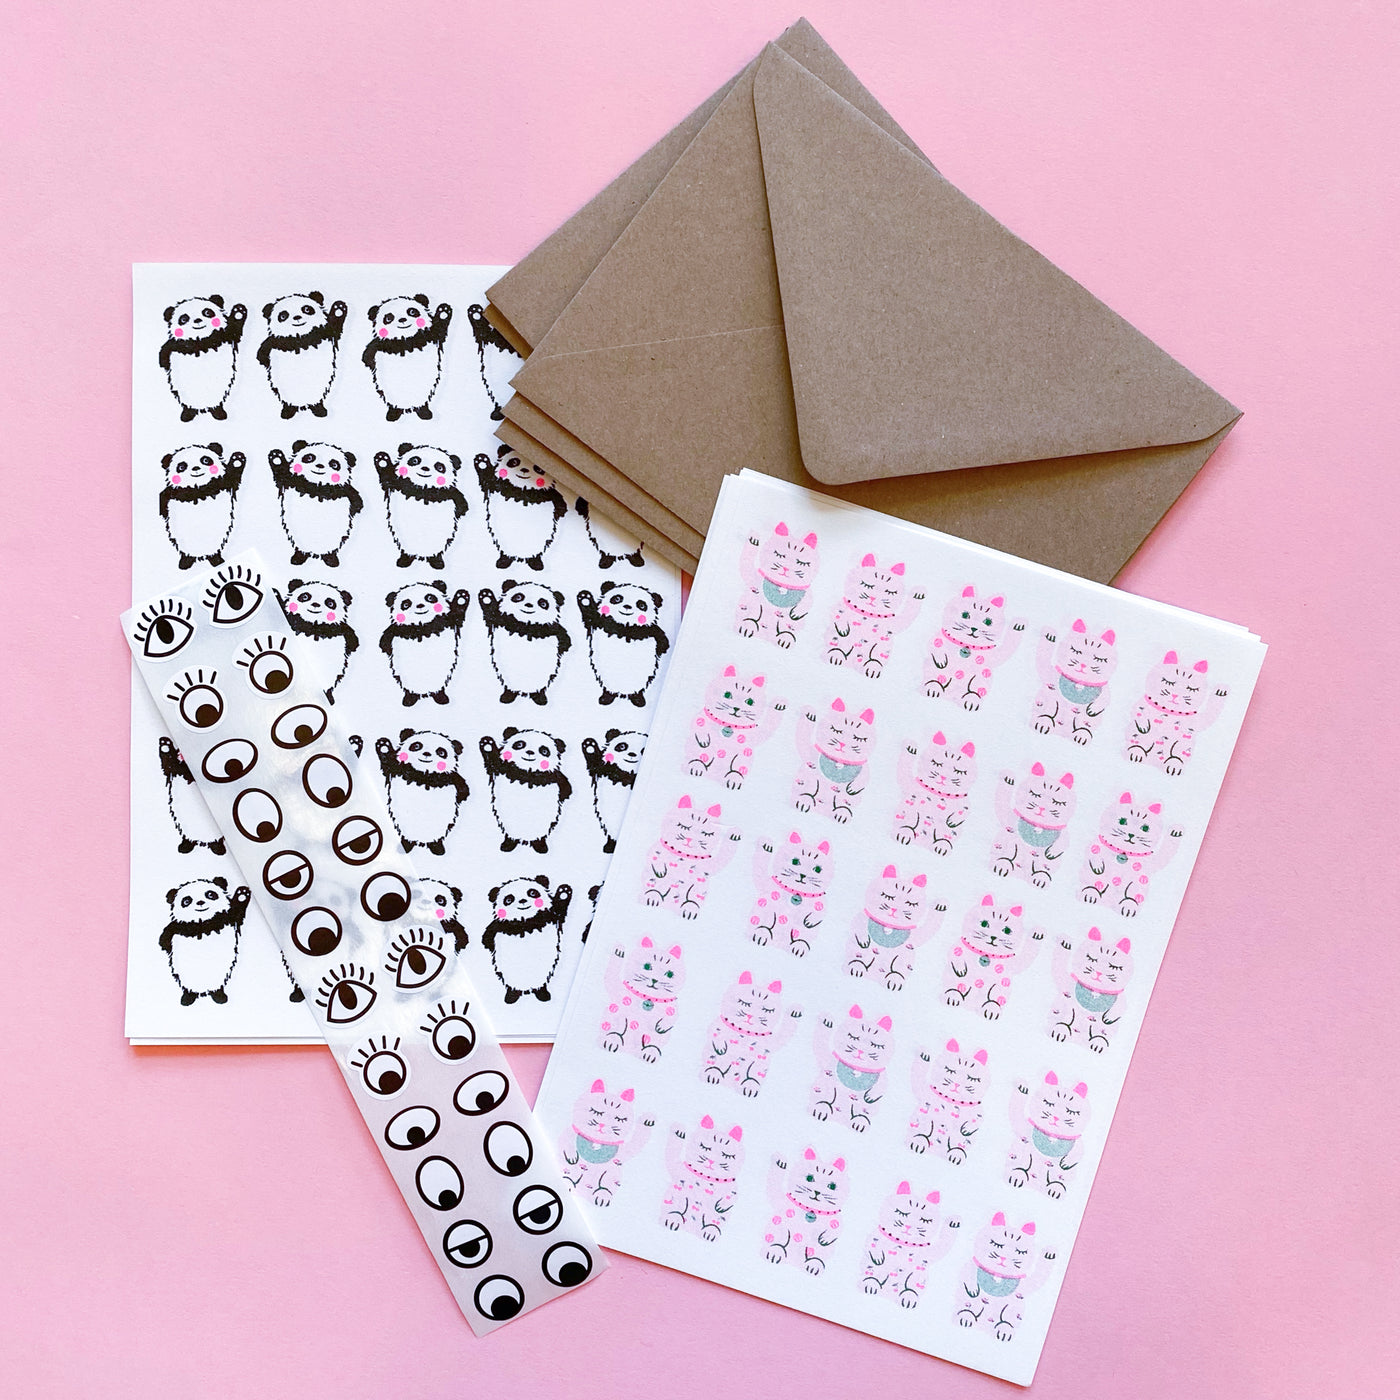 Writing paper with pandas and lucky cat designs. They come with eye stickers and brown kraft envelopes.